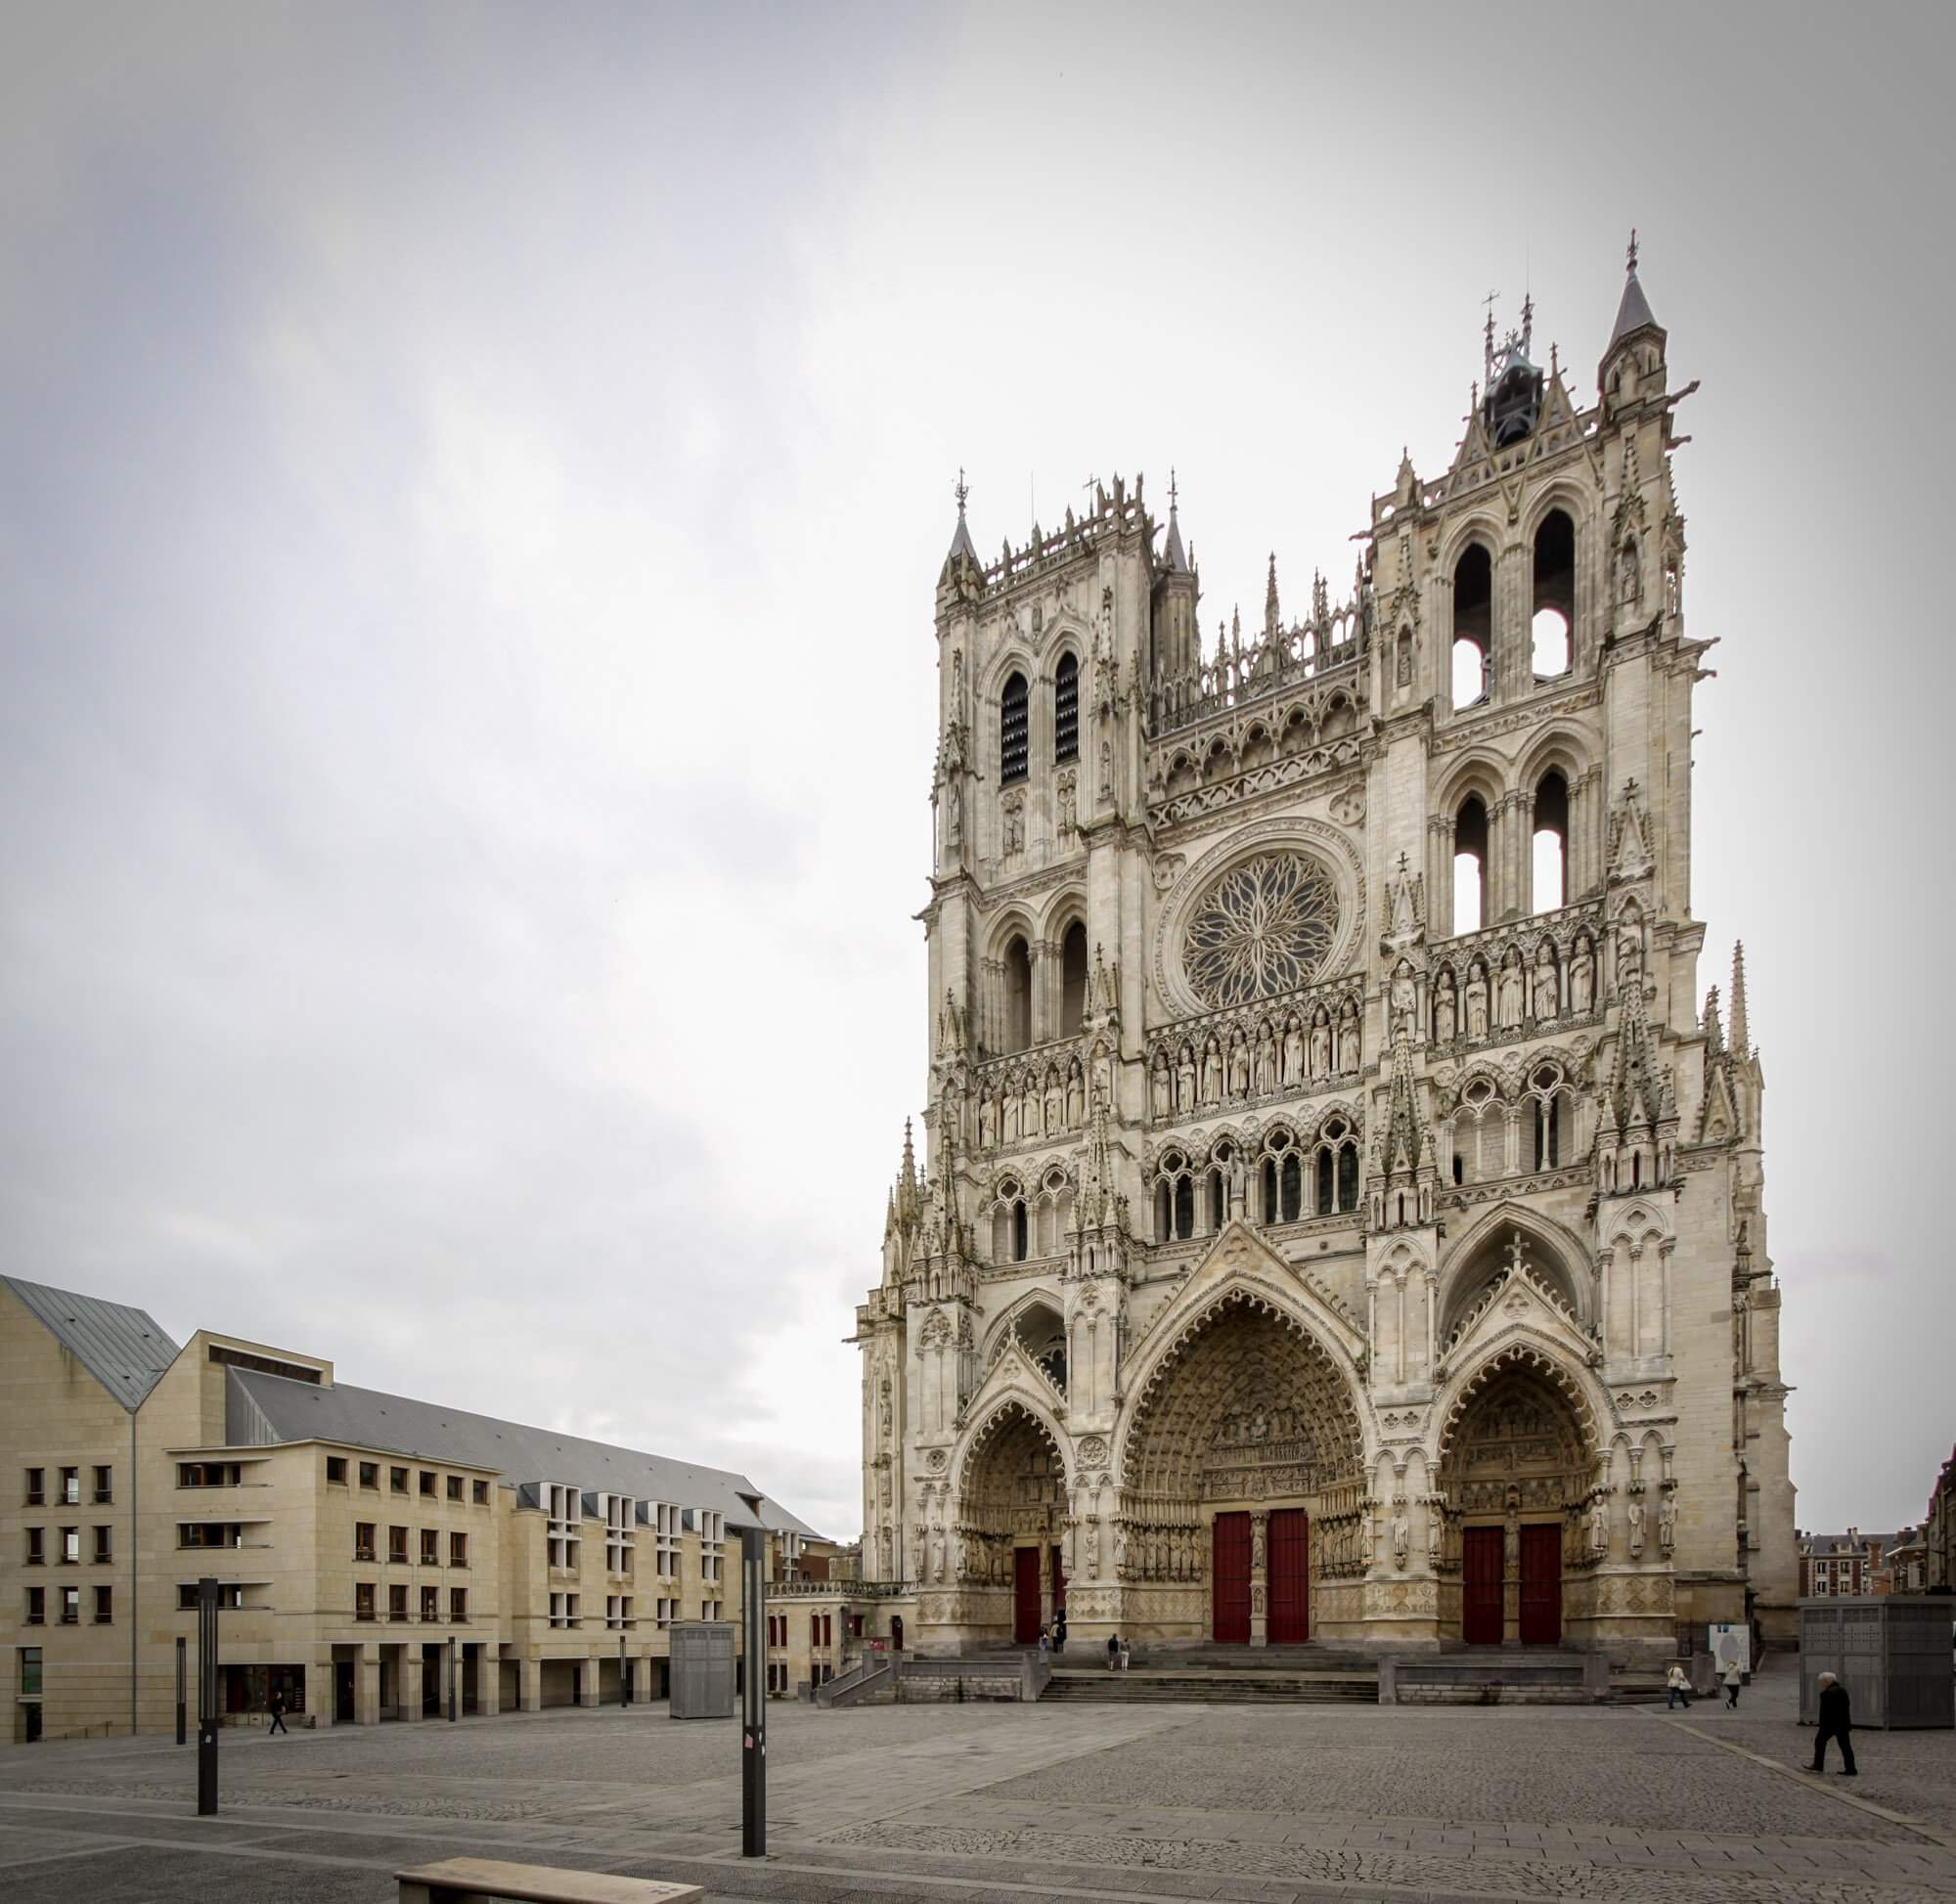 The 13th century Amiens cathedral, among the largest church buildings in the world (and largest in France)